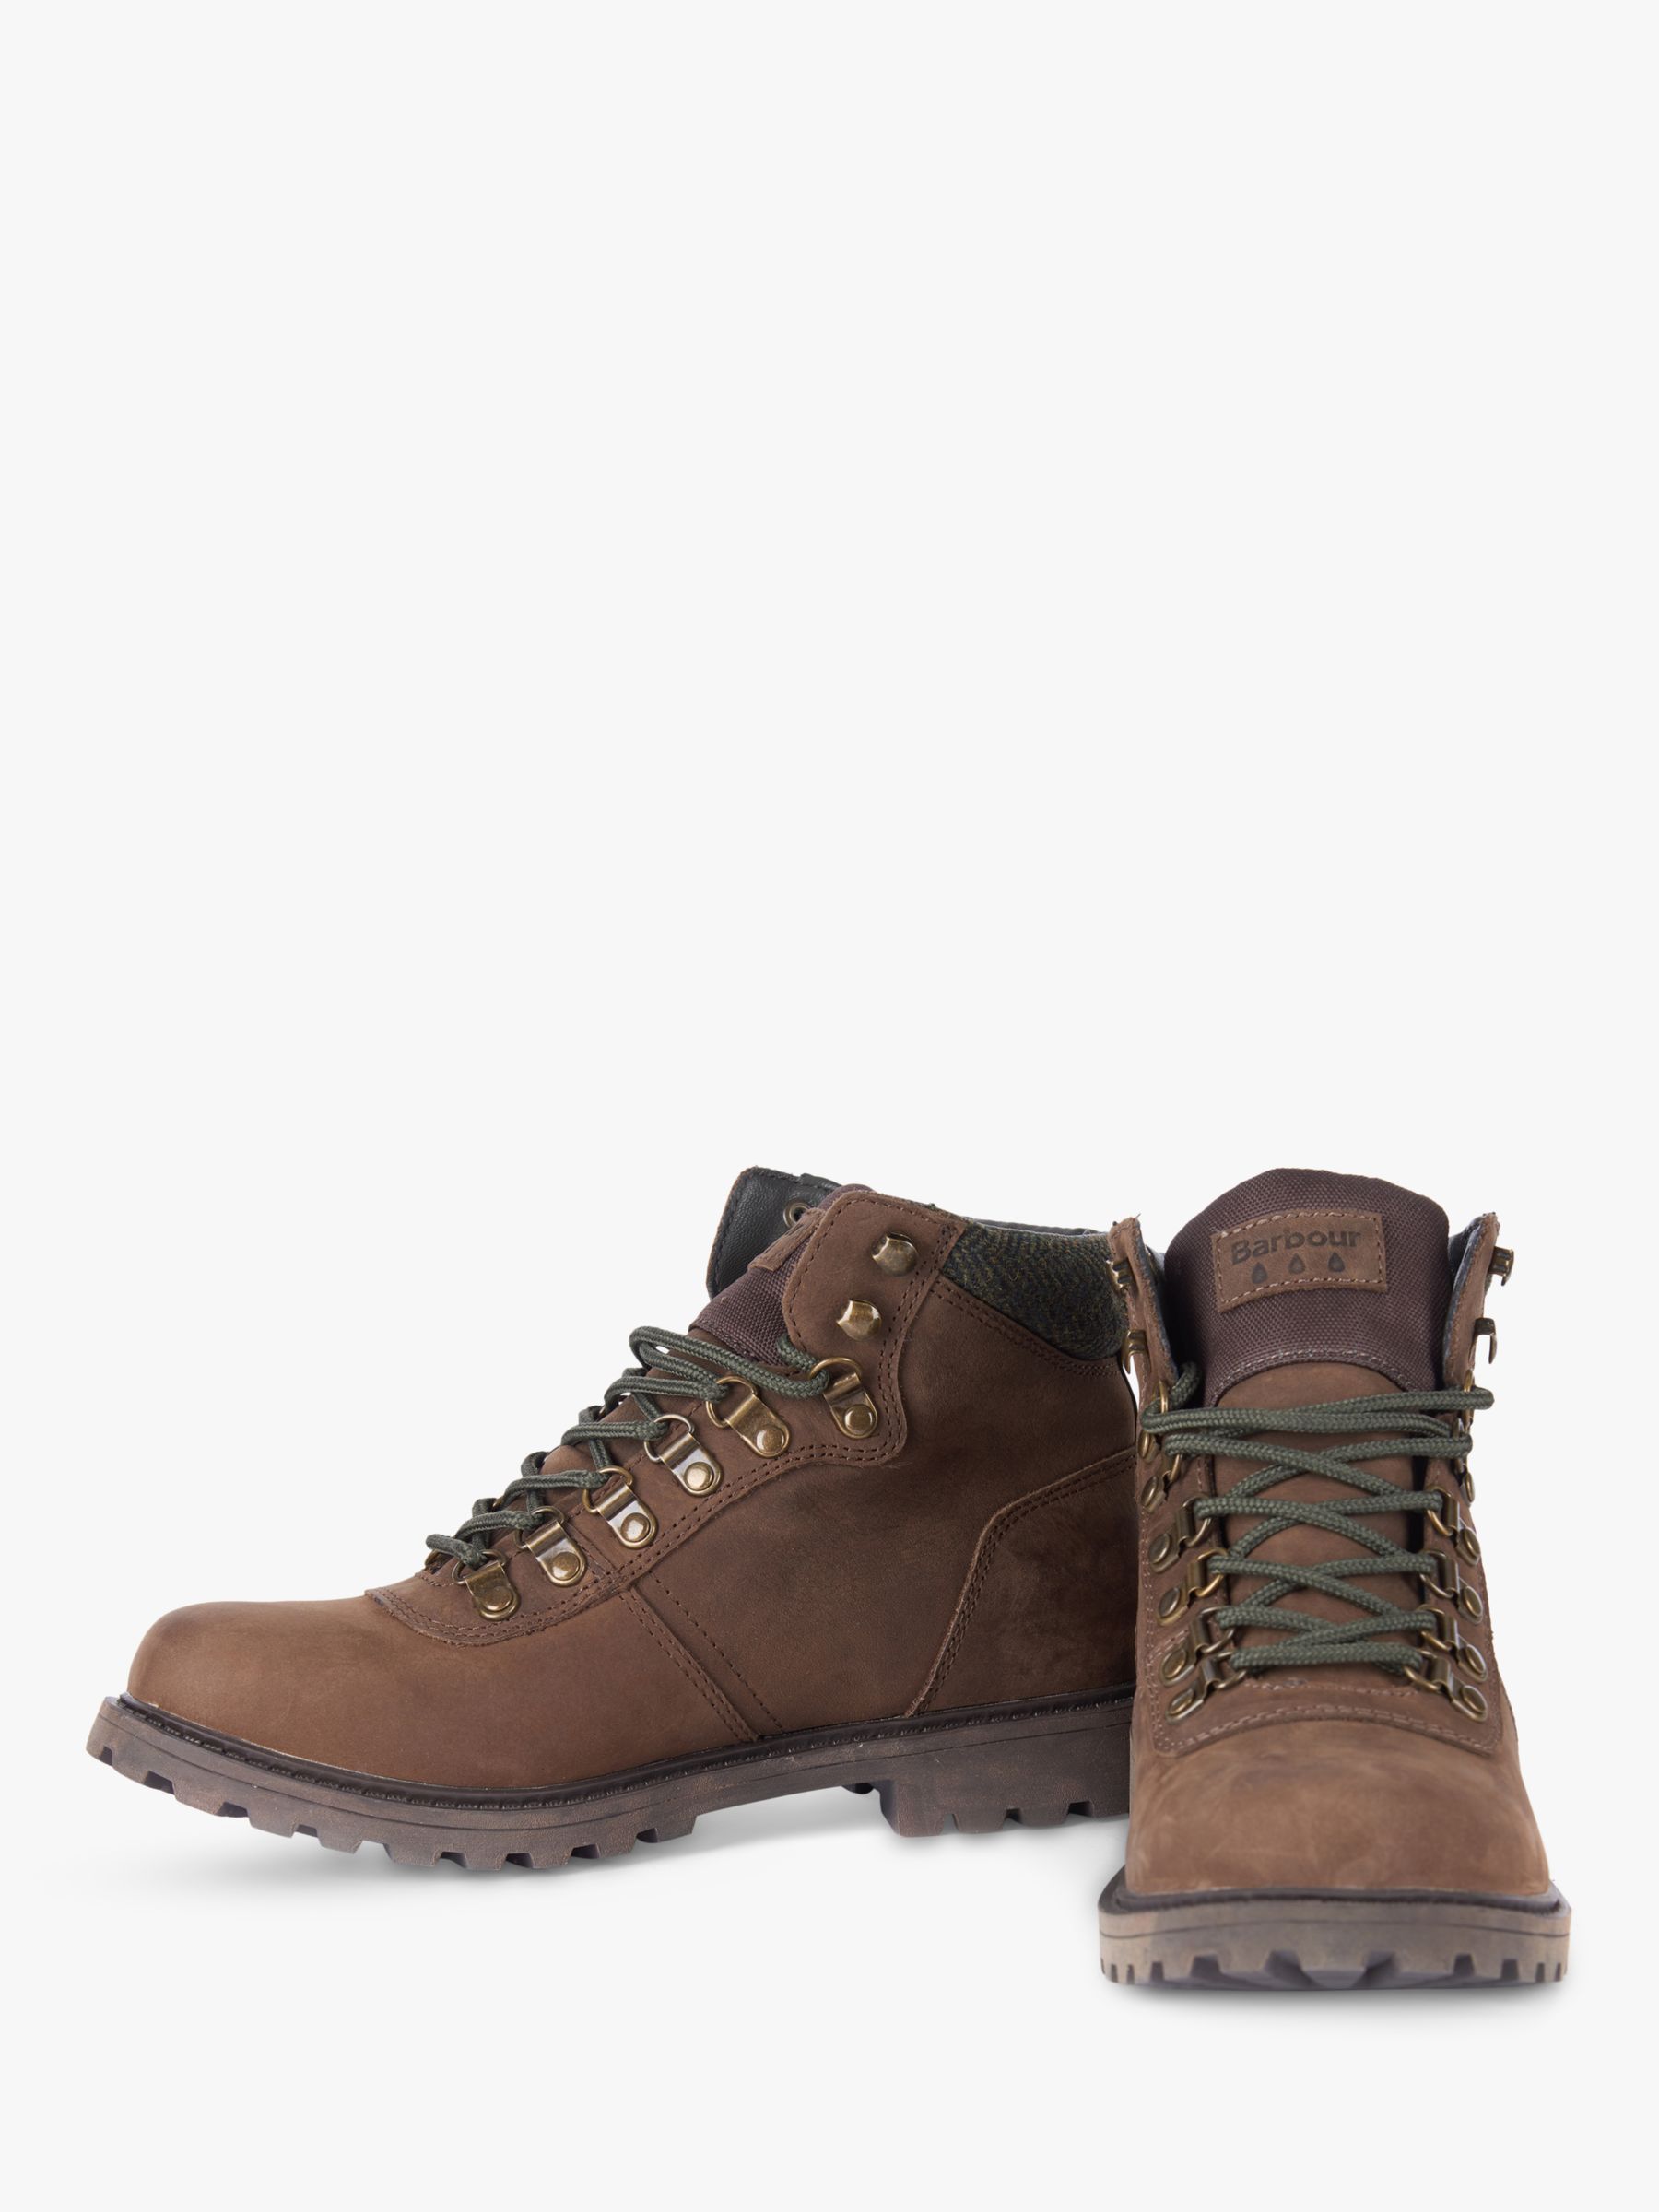 barbour hiking boots